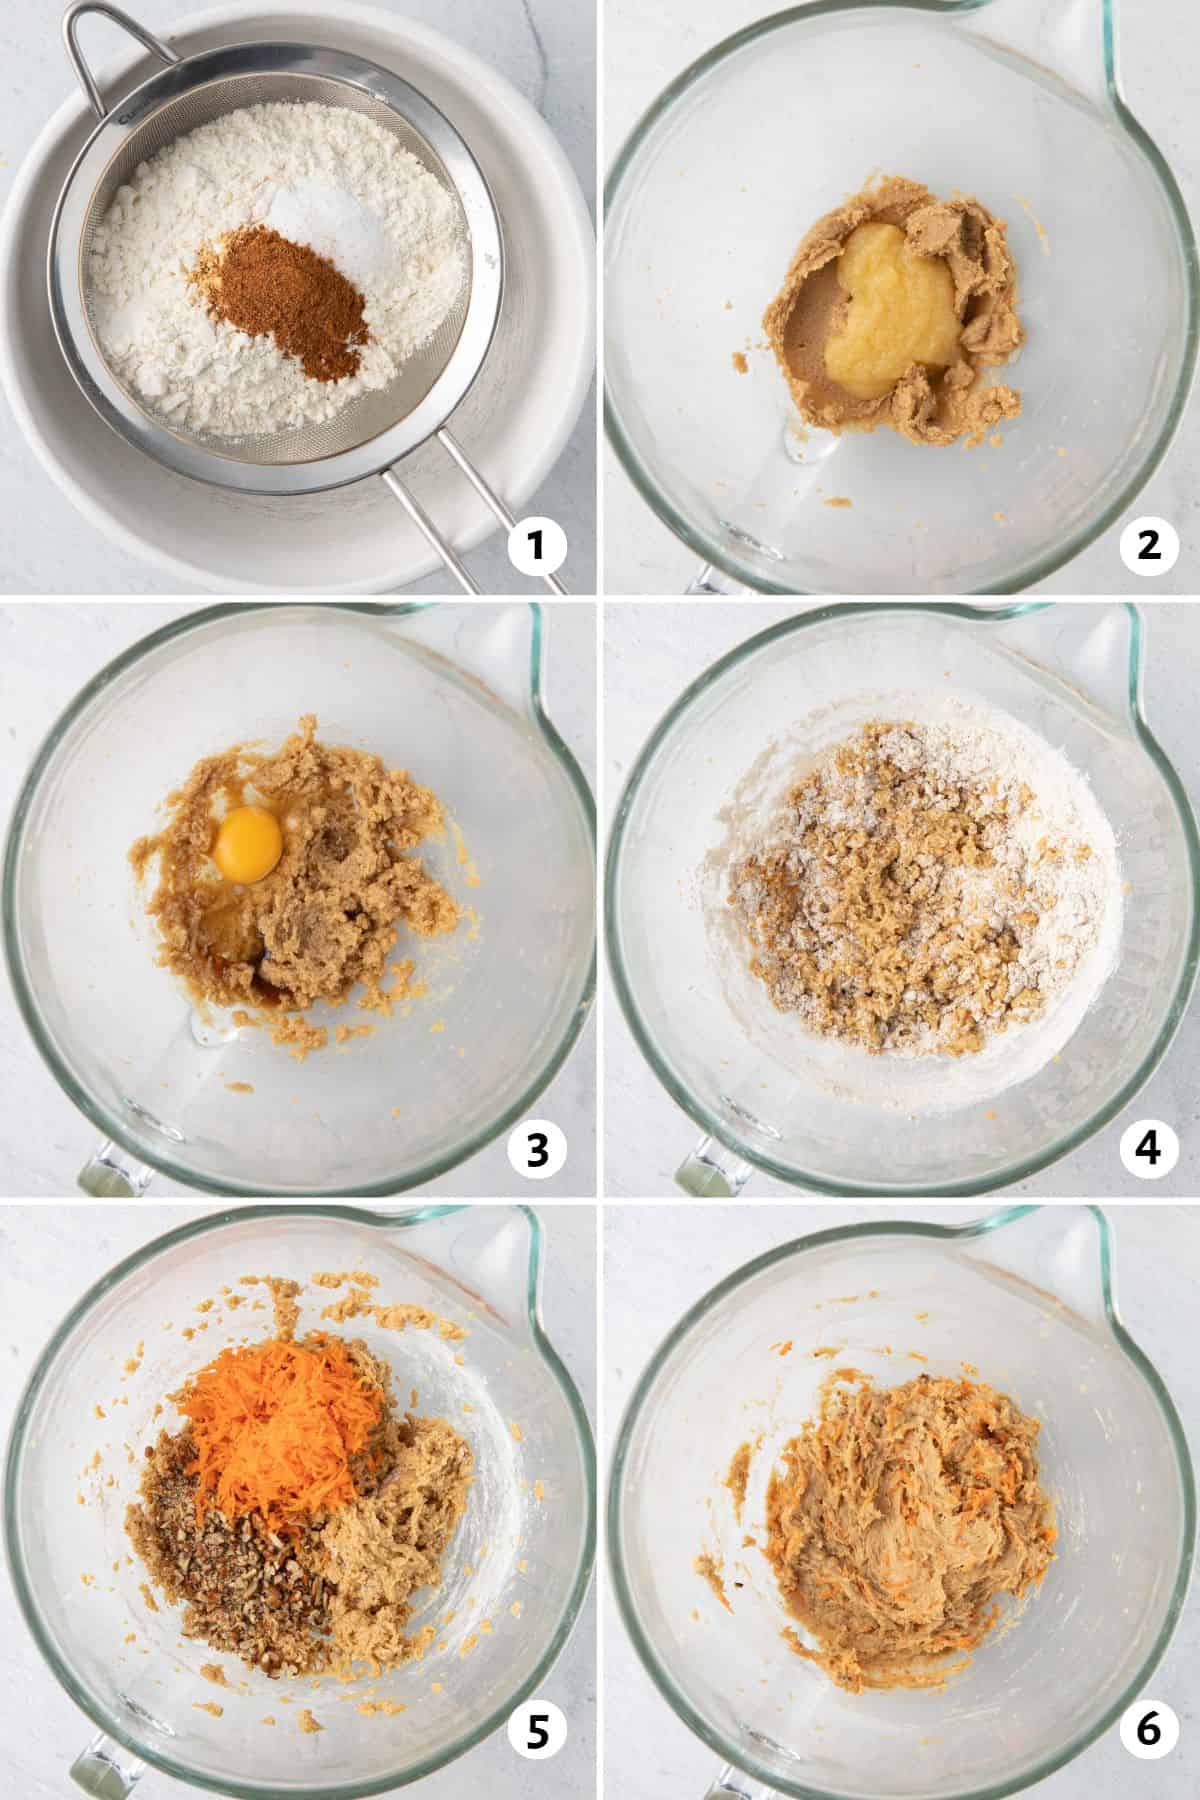 6 image collage making recipe in one bowl: 1- dry ingredients in a sifter over a bowl before being sifted, 2- butter and sugar creamed together with applesauce added, 3- after combined with an egg added, 4- flour mixture added, 5- shredded carrots and pecans added before mixing, 6- after mixing.